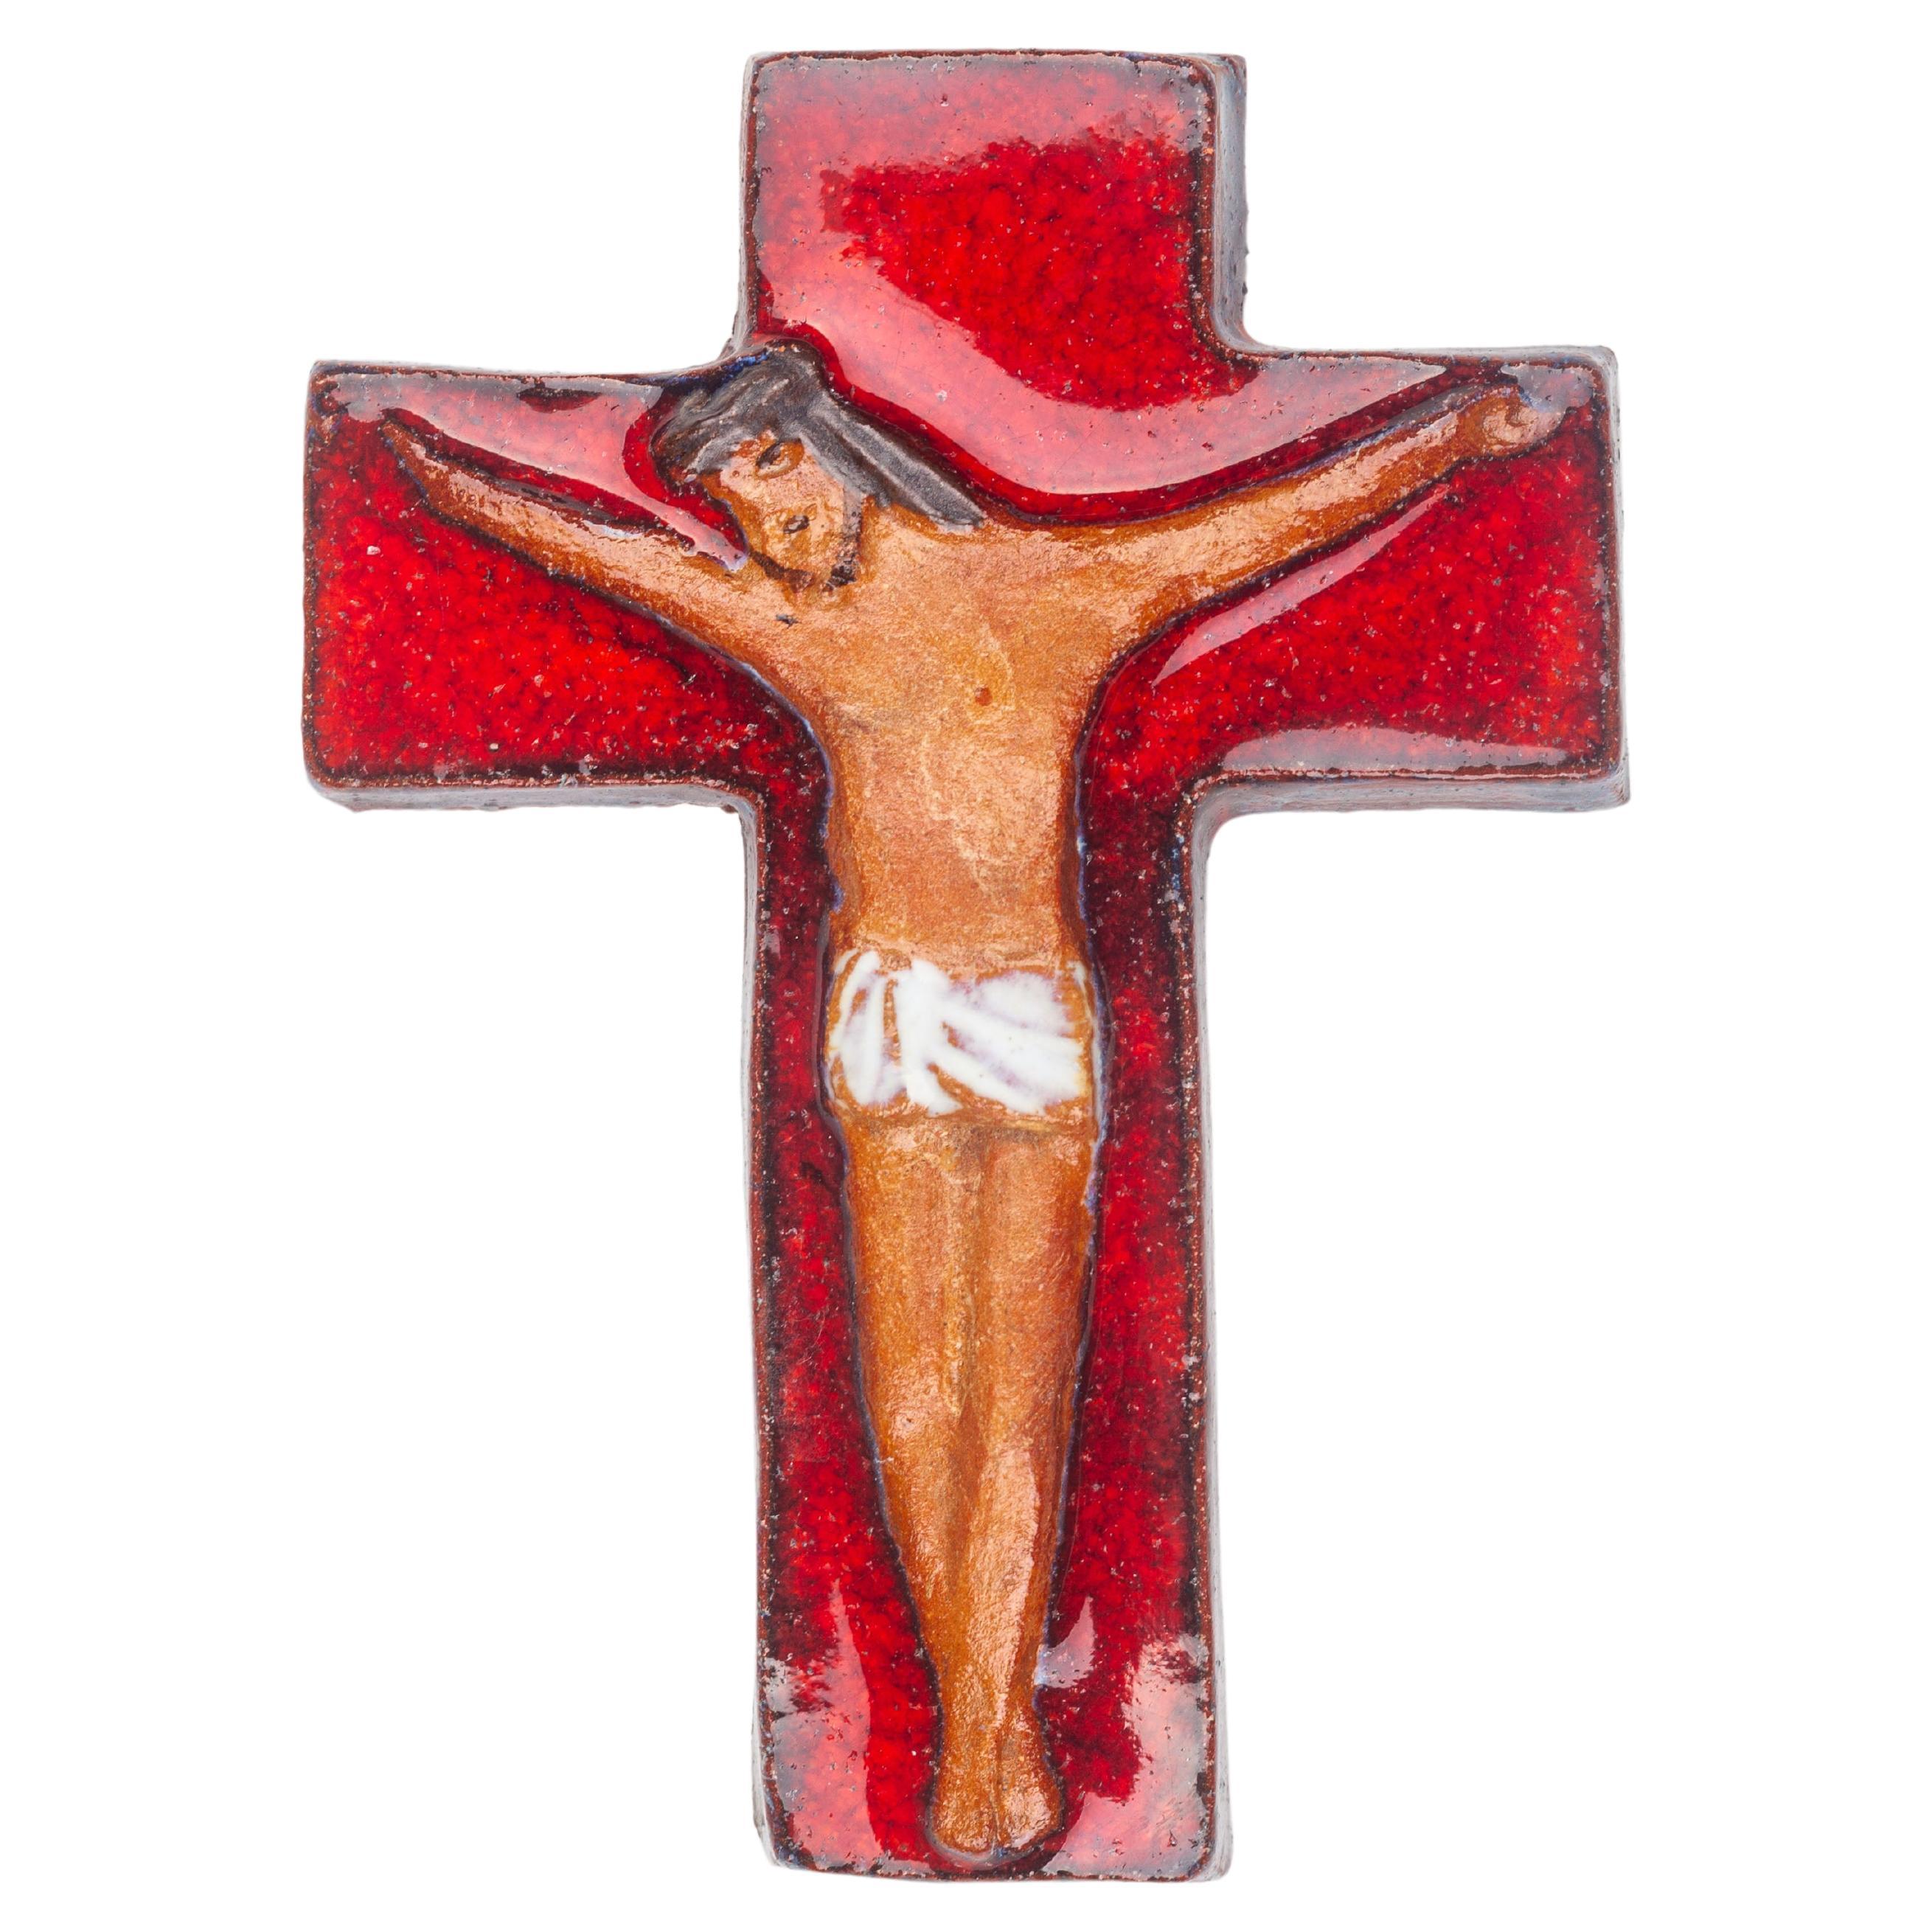 Glossy Red Ceramic Cross with Abstract Matte Christ Figure in Earth Tones